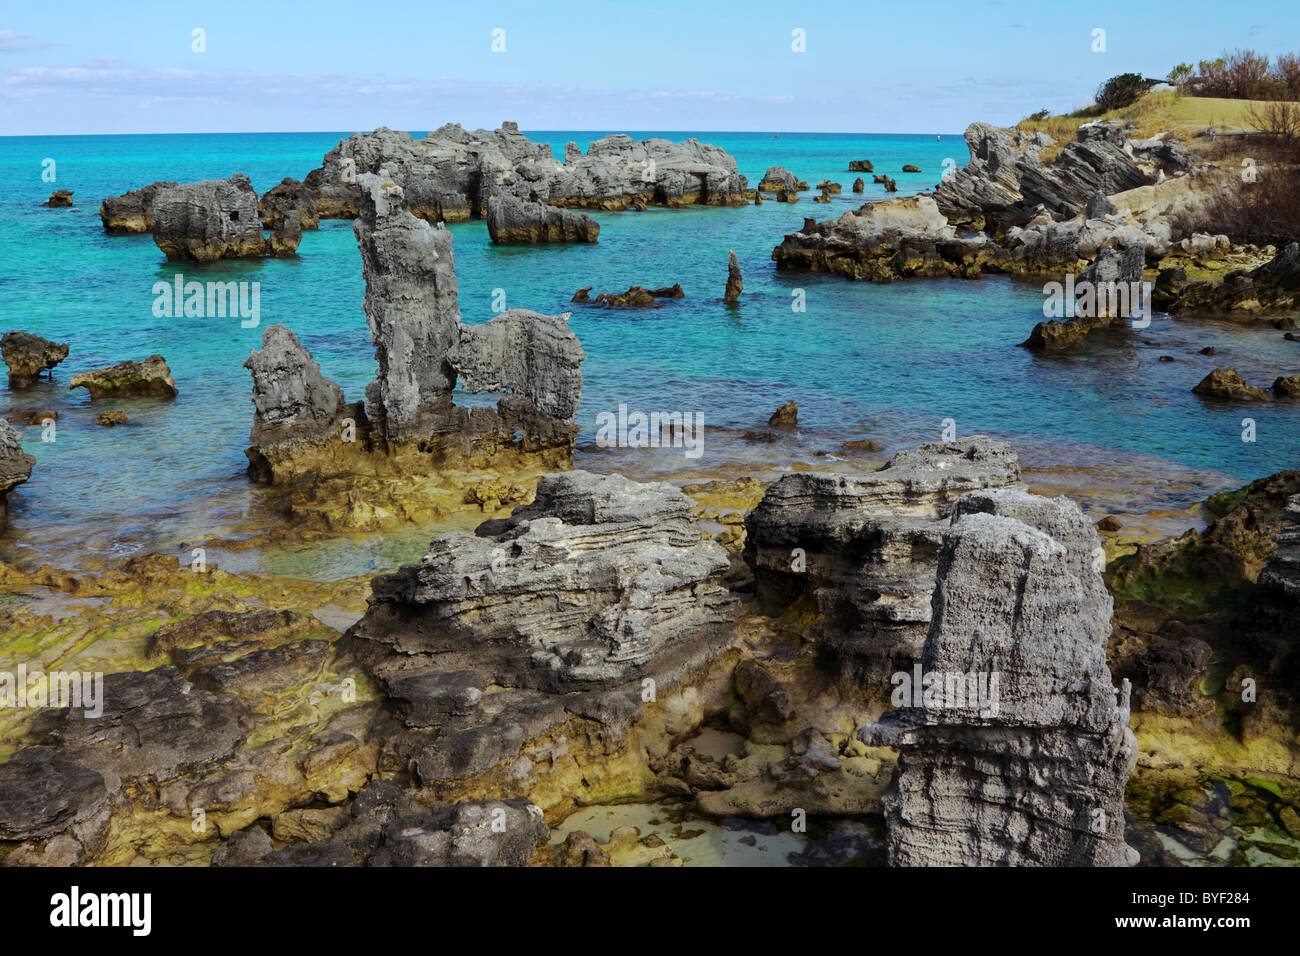 Turquise water and coral rock in St. George, Bermuda Stock Photo